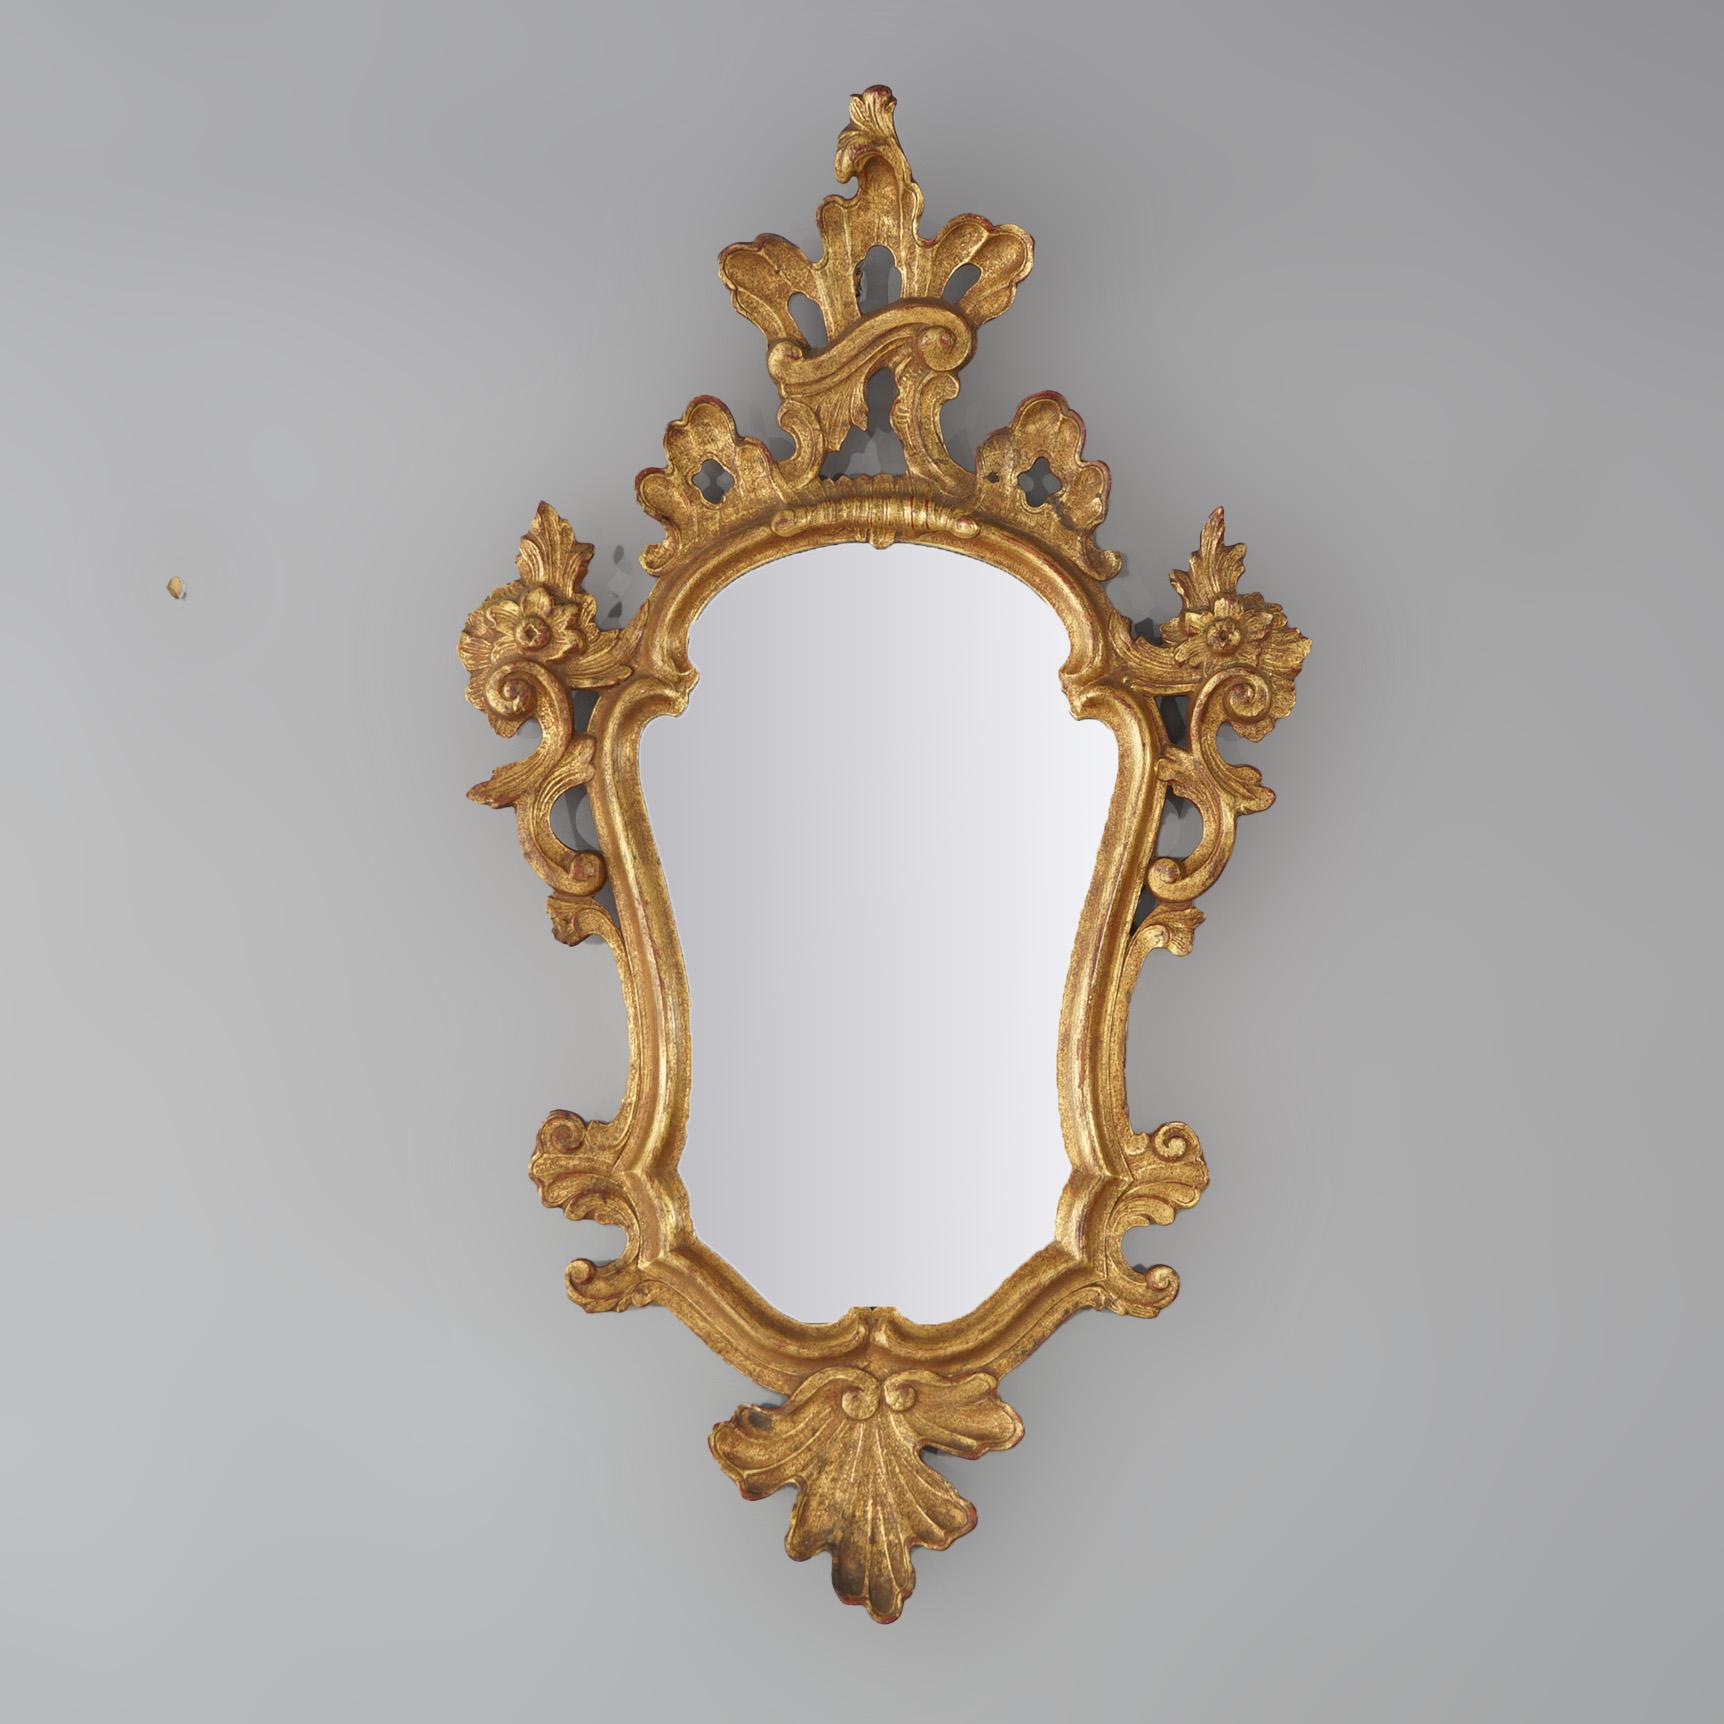 An antique Italian Venetian wall mirror offers shaped giltwood frame in foliate and floral form, c1920

Measures- 35''H x 19.75''W x 2.25''D; 18.5'' x 11.75'' sight